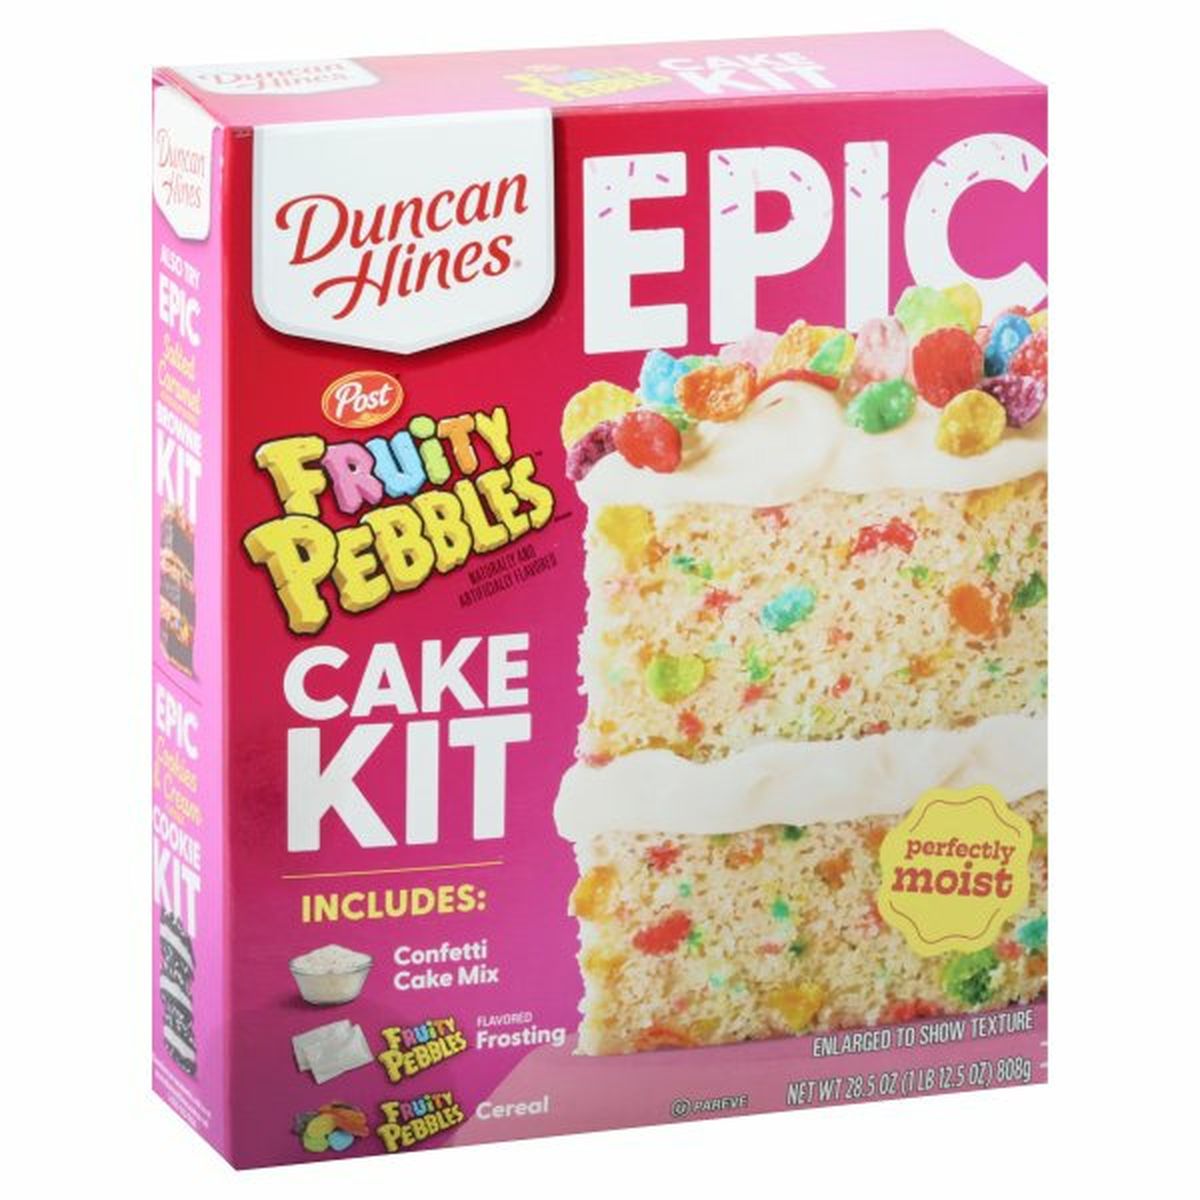 Calories in Duncan Hines Epic Cake Kit, Fruity Pebbles